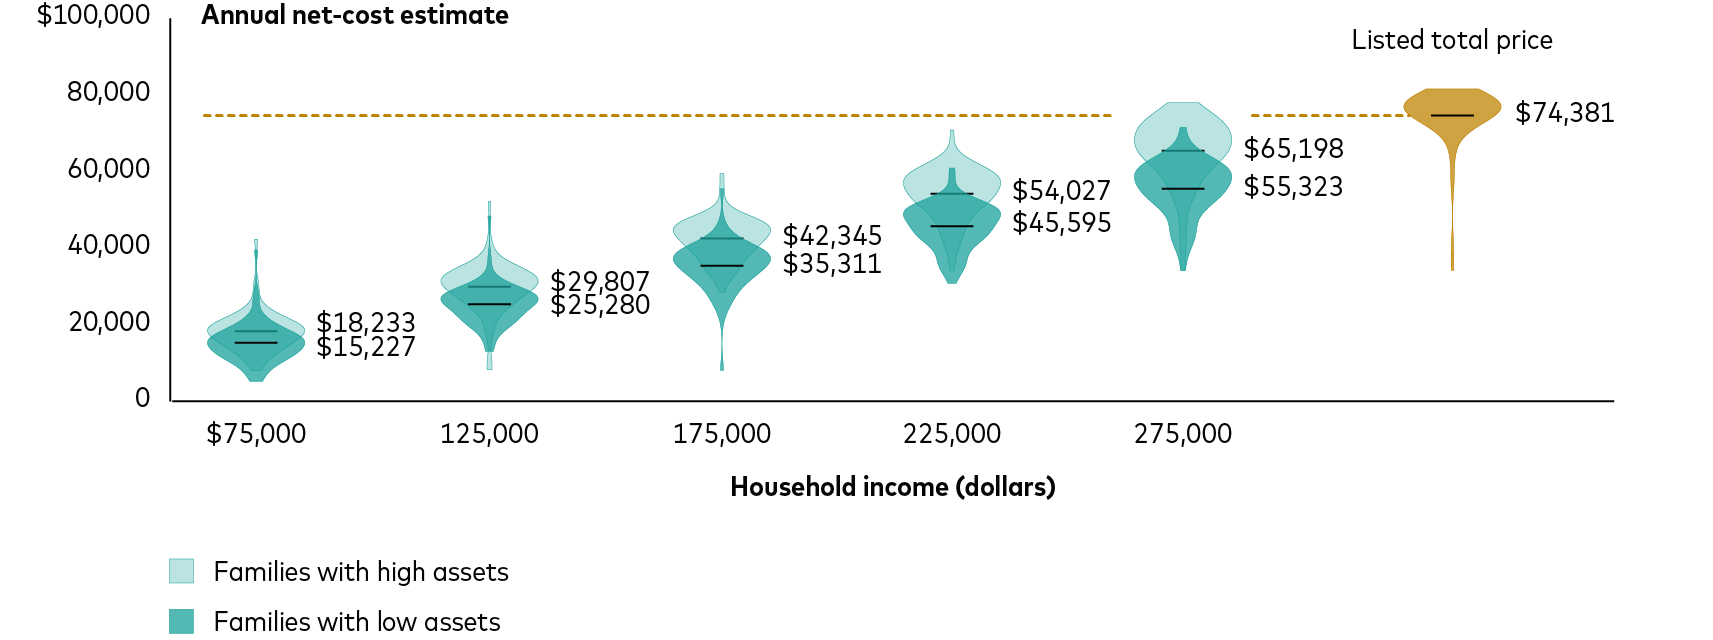 The violin chart shows the annual net-cost estimates for colleges by household income and assets for familes with two students in college. The x-axis is household income while the y-axis is the annual net cost estimate. Total price across the schools ranged from $34,100 to $81,300 with a mean of $74,381. For families with a household income of $75,000, the annual net-cost estimate range for those with low assets was $5,200 to $39,400 with a mean of $15,227; for those with high assets, it was $8,000 to $42,200 with a mean of $18,233. For families with a household income of $125,000, the estimate range for those with low assets was $13,000 to $48,200 with a mean of $25,280; for those with high assets, it was $8,200 to $52,000 with a mean of $29,807. For families with a household income of $175,000, the estimate range for those with low assets was $8,050 to $55,300 with a mean of $35,311; for those with high assets, it was $28,300 to $59,300 with a mean of $42,345. For families with a household income of $225,000, the estimate range for those with low assets was $30,700 to $60,700 with a mean of $45,595; for those with high assets, it was $34,100 to $70,600 with a mean of $54,027. For families with a household income of $275,000, the estimate range for those with low assets was $34,100 to $71,300 with a mean of $55,323; for those with high assets, it was $34,100 to $77,700 with a mean of $65,198.